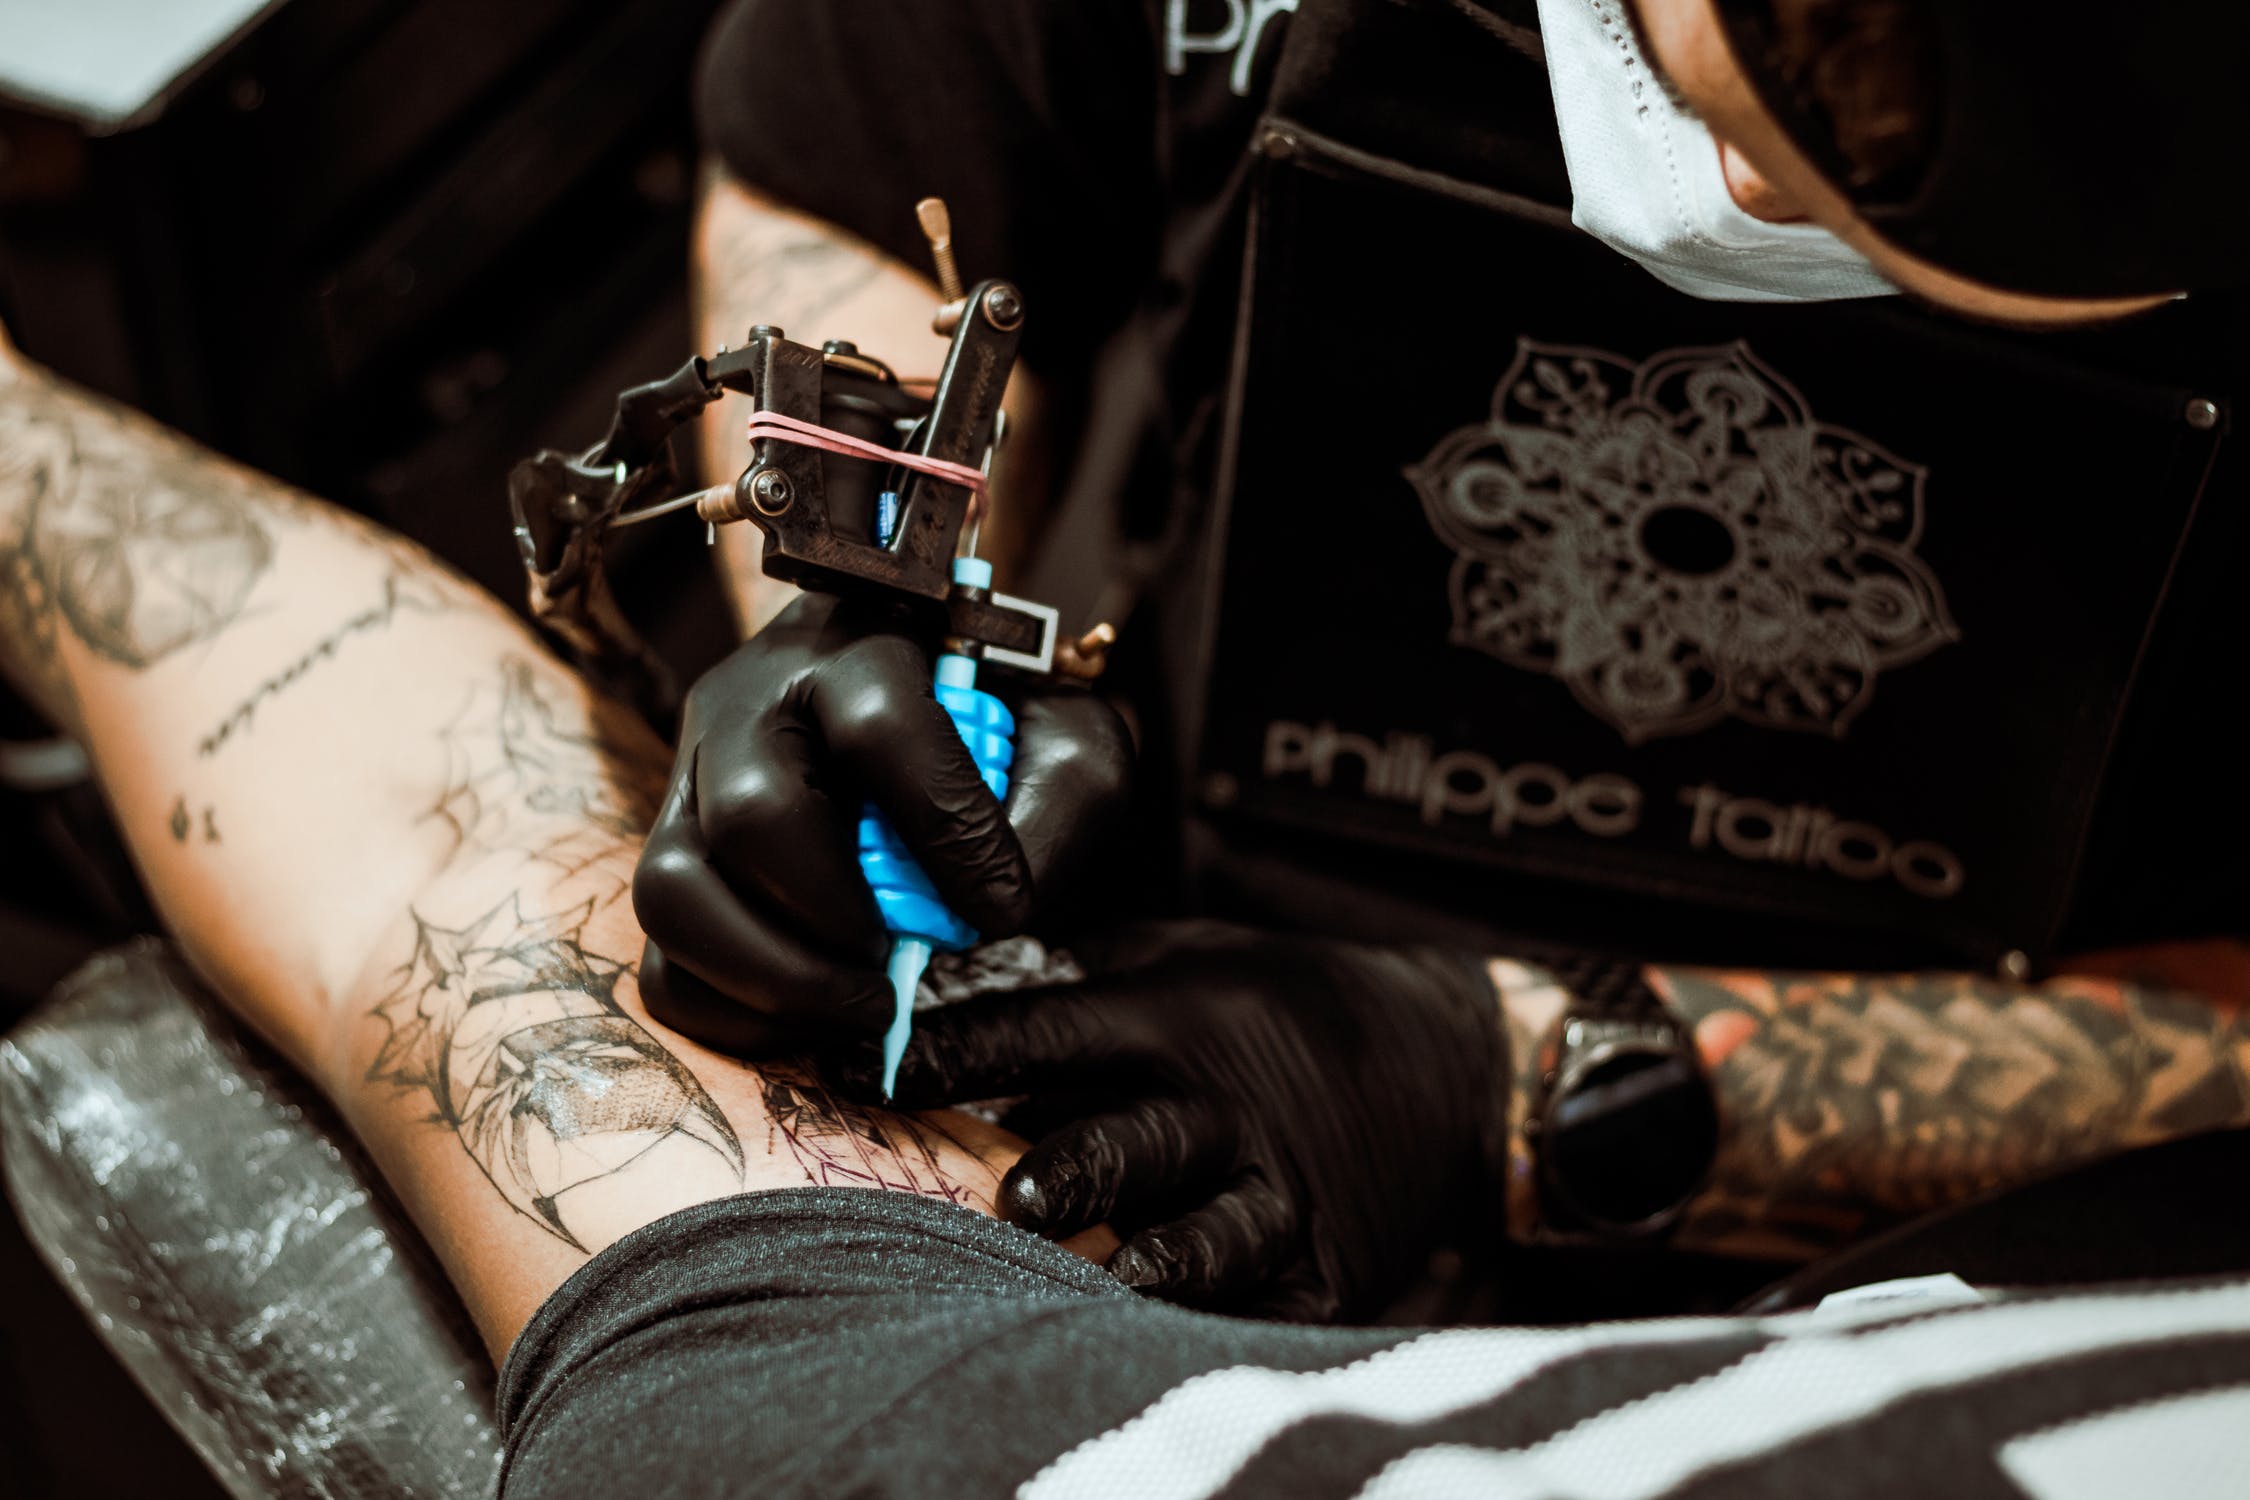 Do Tattoo Apprentices Get Paid? – What You Should Know About Tattoo Apprenticeship